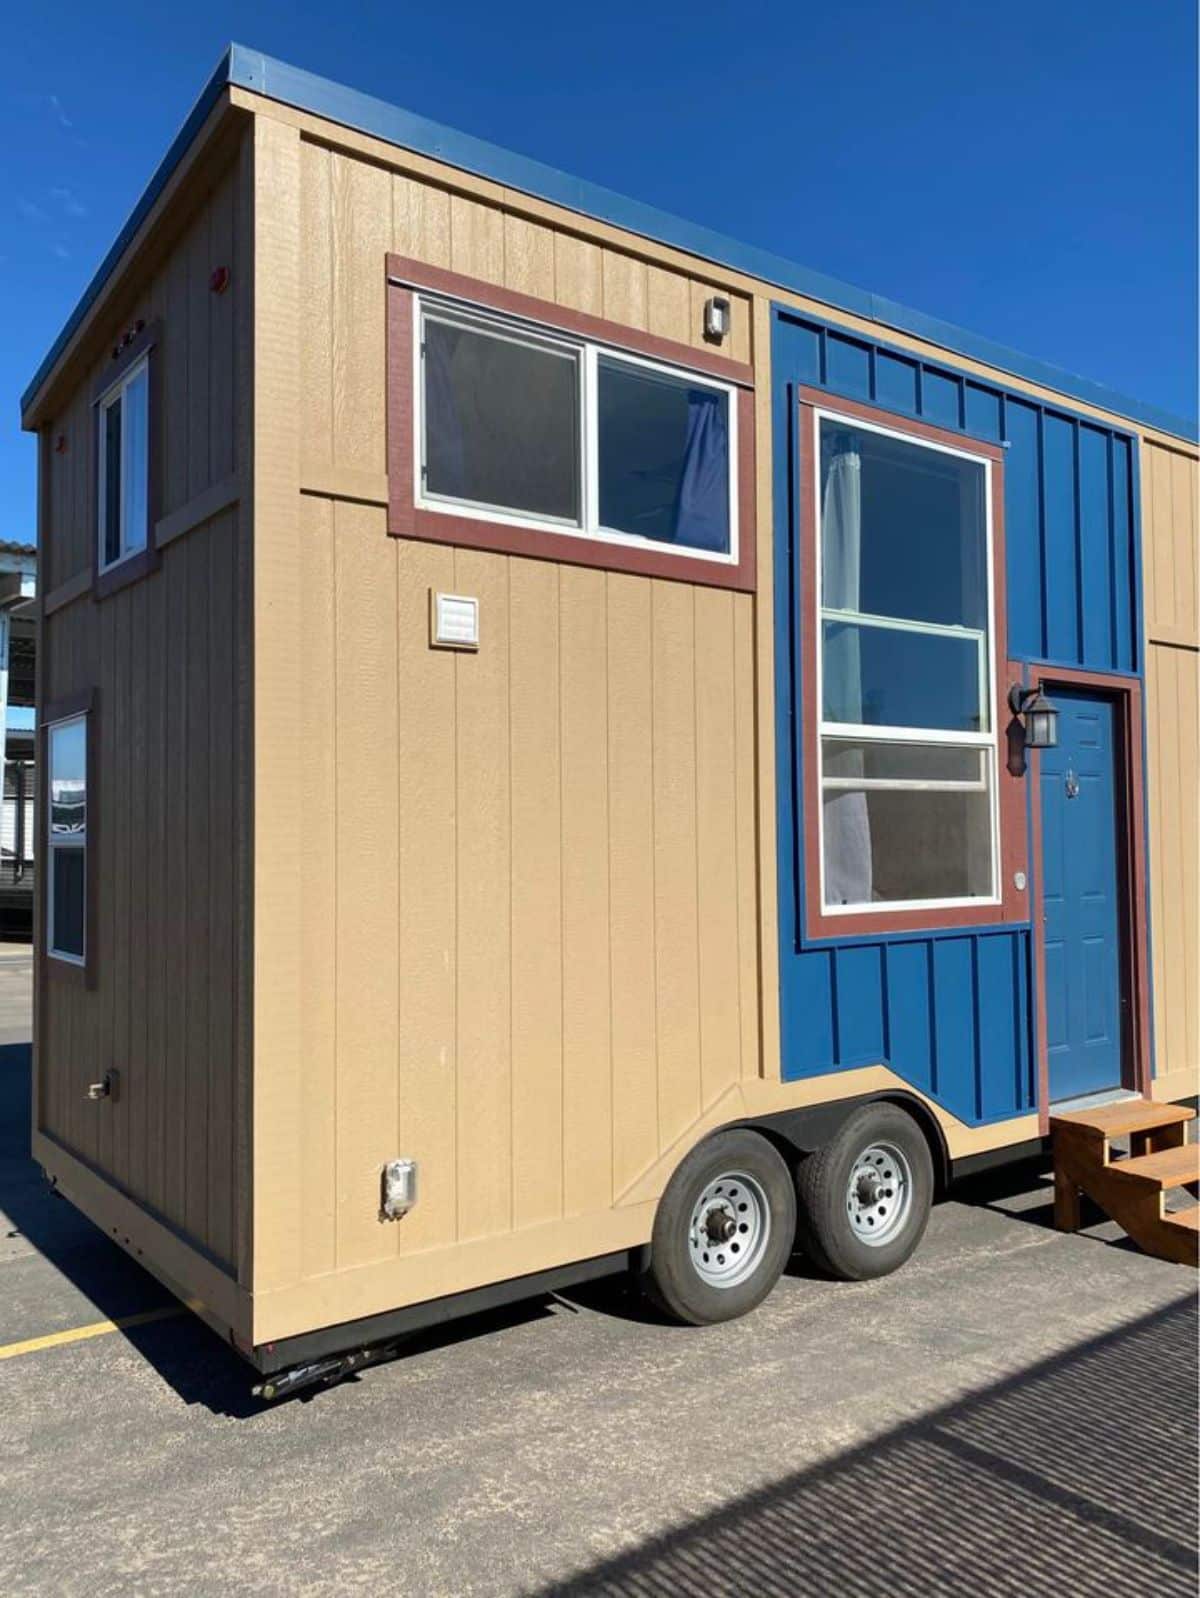 front side view of fully furnished tiny home